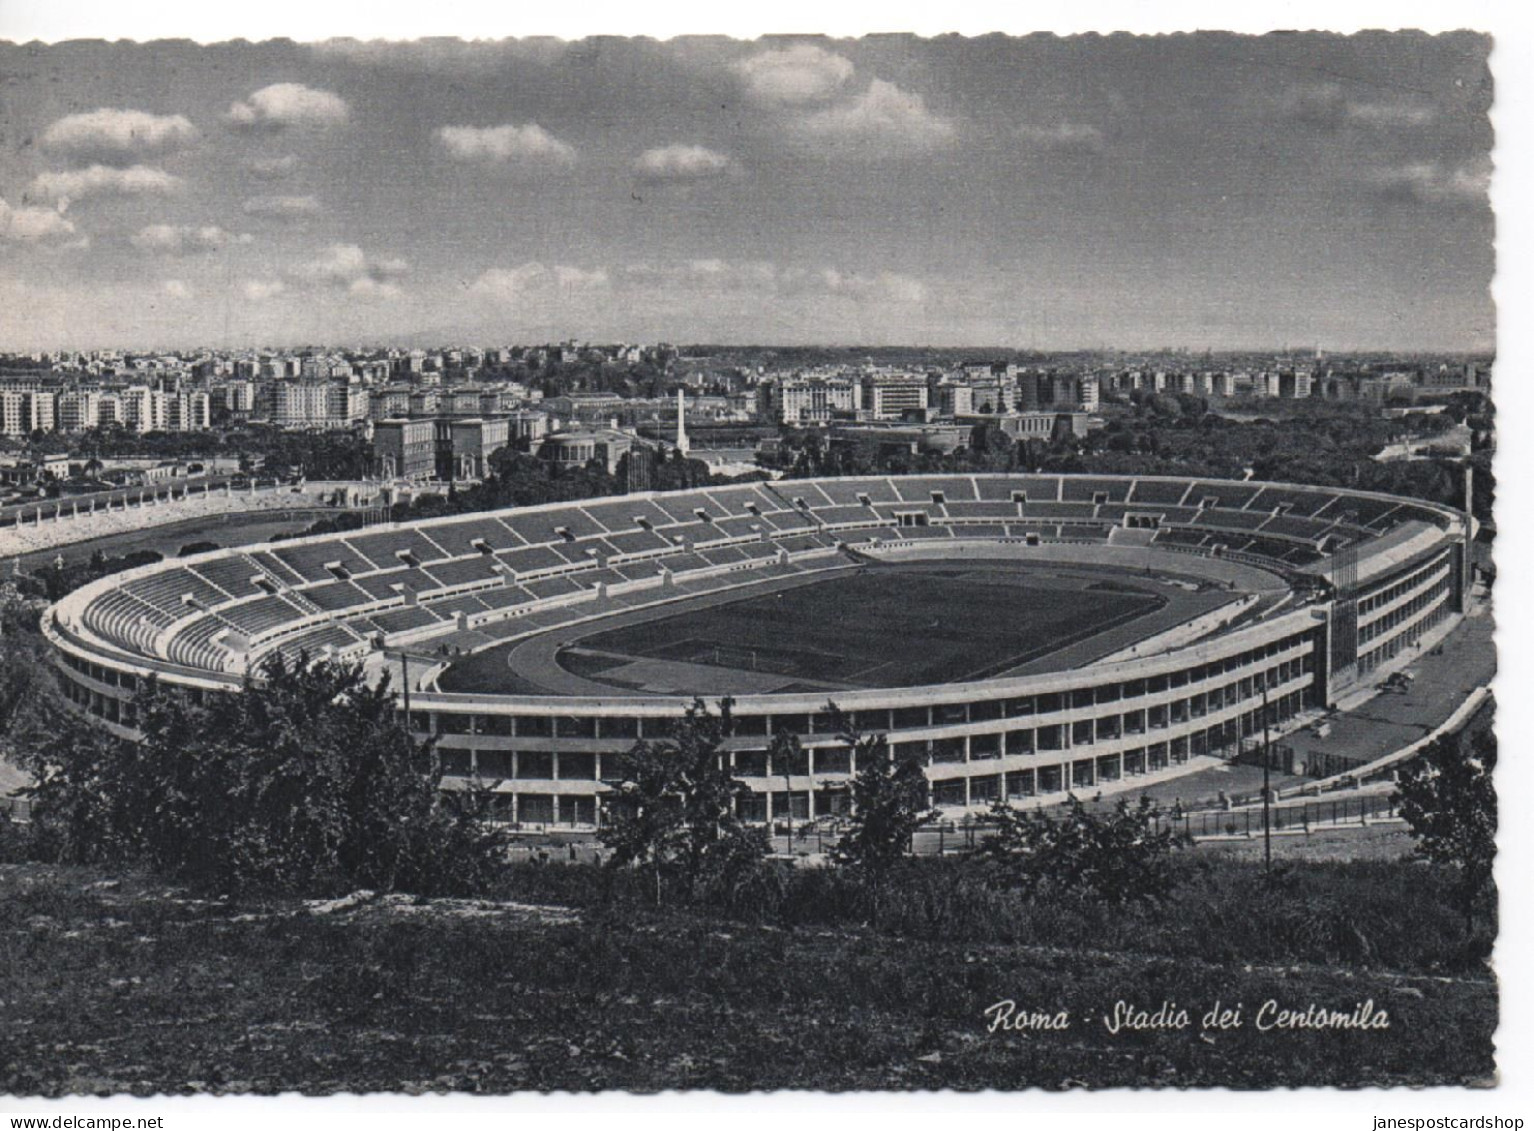 THE STADIUM OF HUNDRED THOUSAND SPECTATORS - LARGER SIZED POSTCARD - UNPOSTED - IN GOOD CONDITION - 1950's ? - Stadiums & Sporting Infrastructures